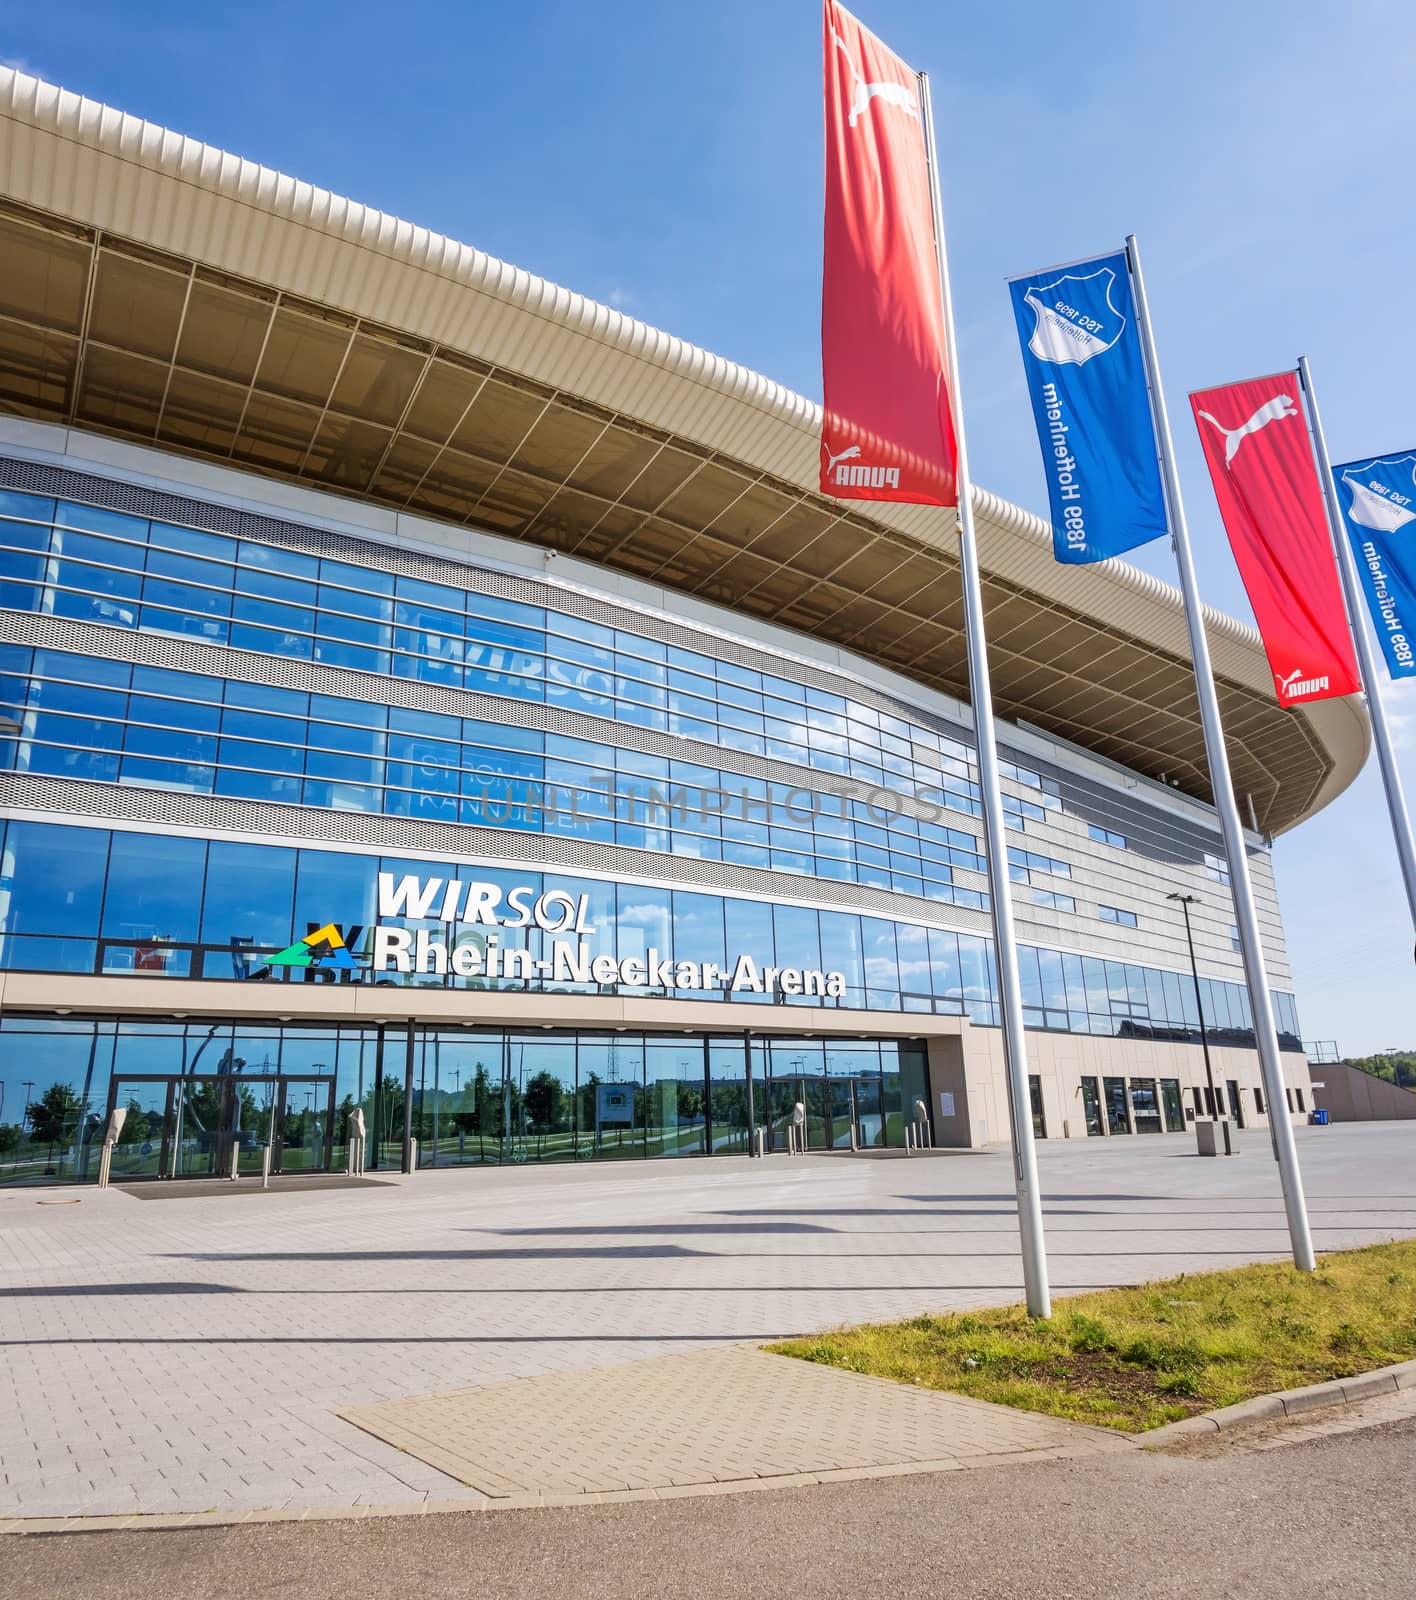 Sinsheim, Germany - May 4, 2014: Rhein-Neckar Arena - the stadium was site of the soccer world cup 2006 for group matches.